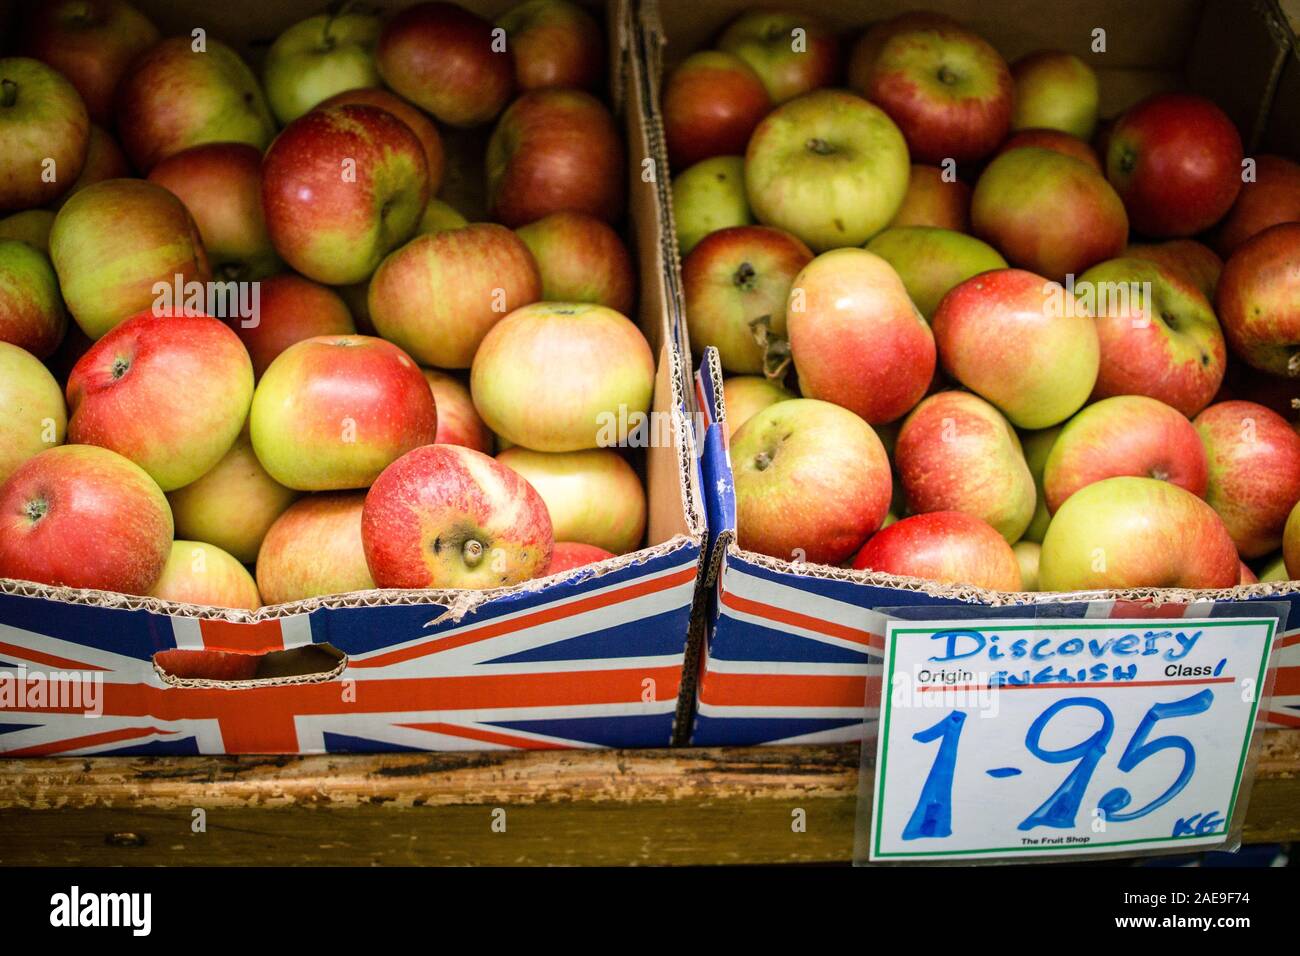 Boxes of Discovery Apples on sale at The Fruit Shop - independent family run green grocer in rural Berkshire - handwritten price label. £1.95 /kg Stock Photo